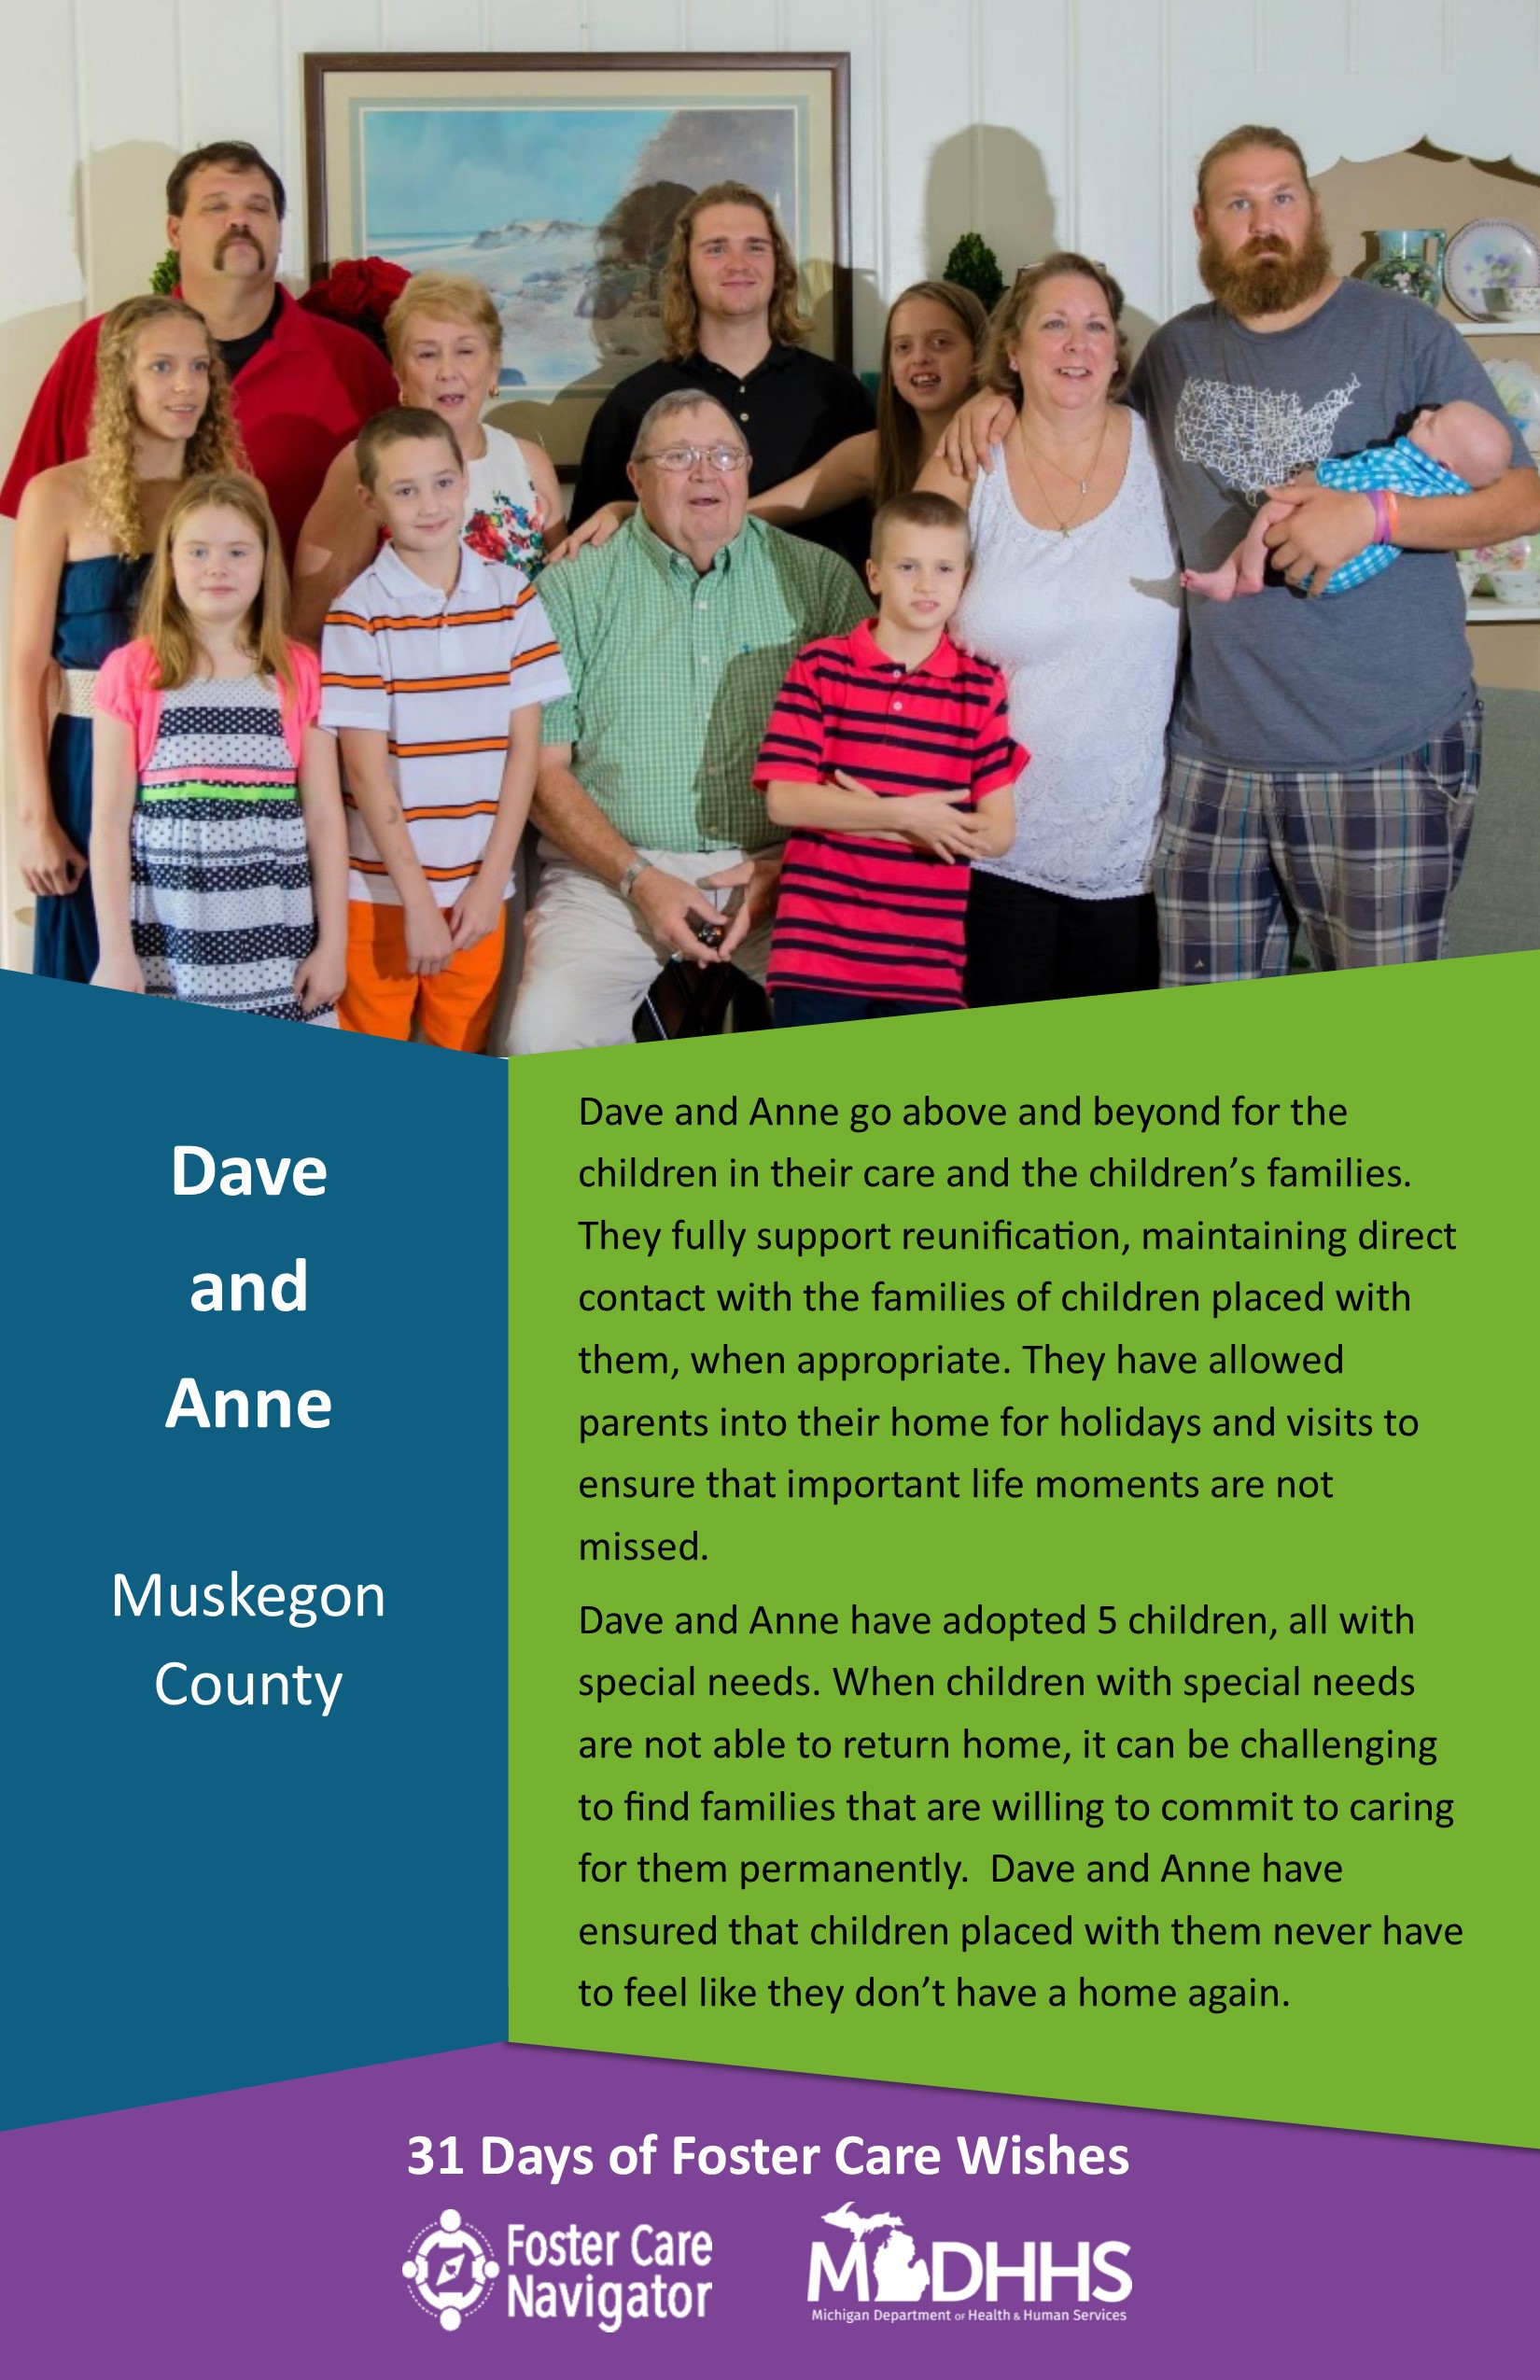 This full page feature includes all of the text listed in the body of this blog post as well as a photo of Dave and Anne. The background is blue on the left, green on the right, and purple at the bottom of the page where the logos are located.